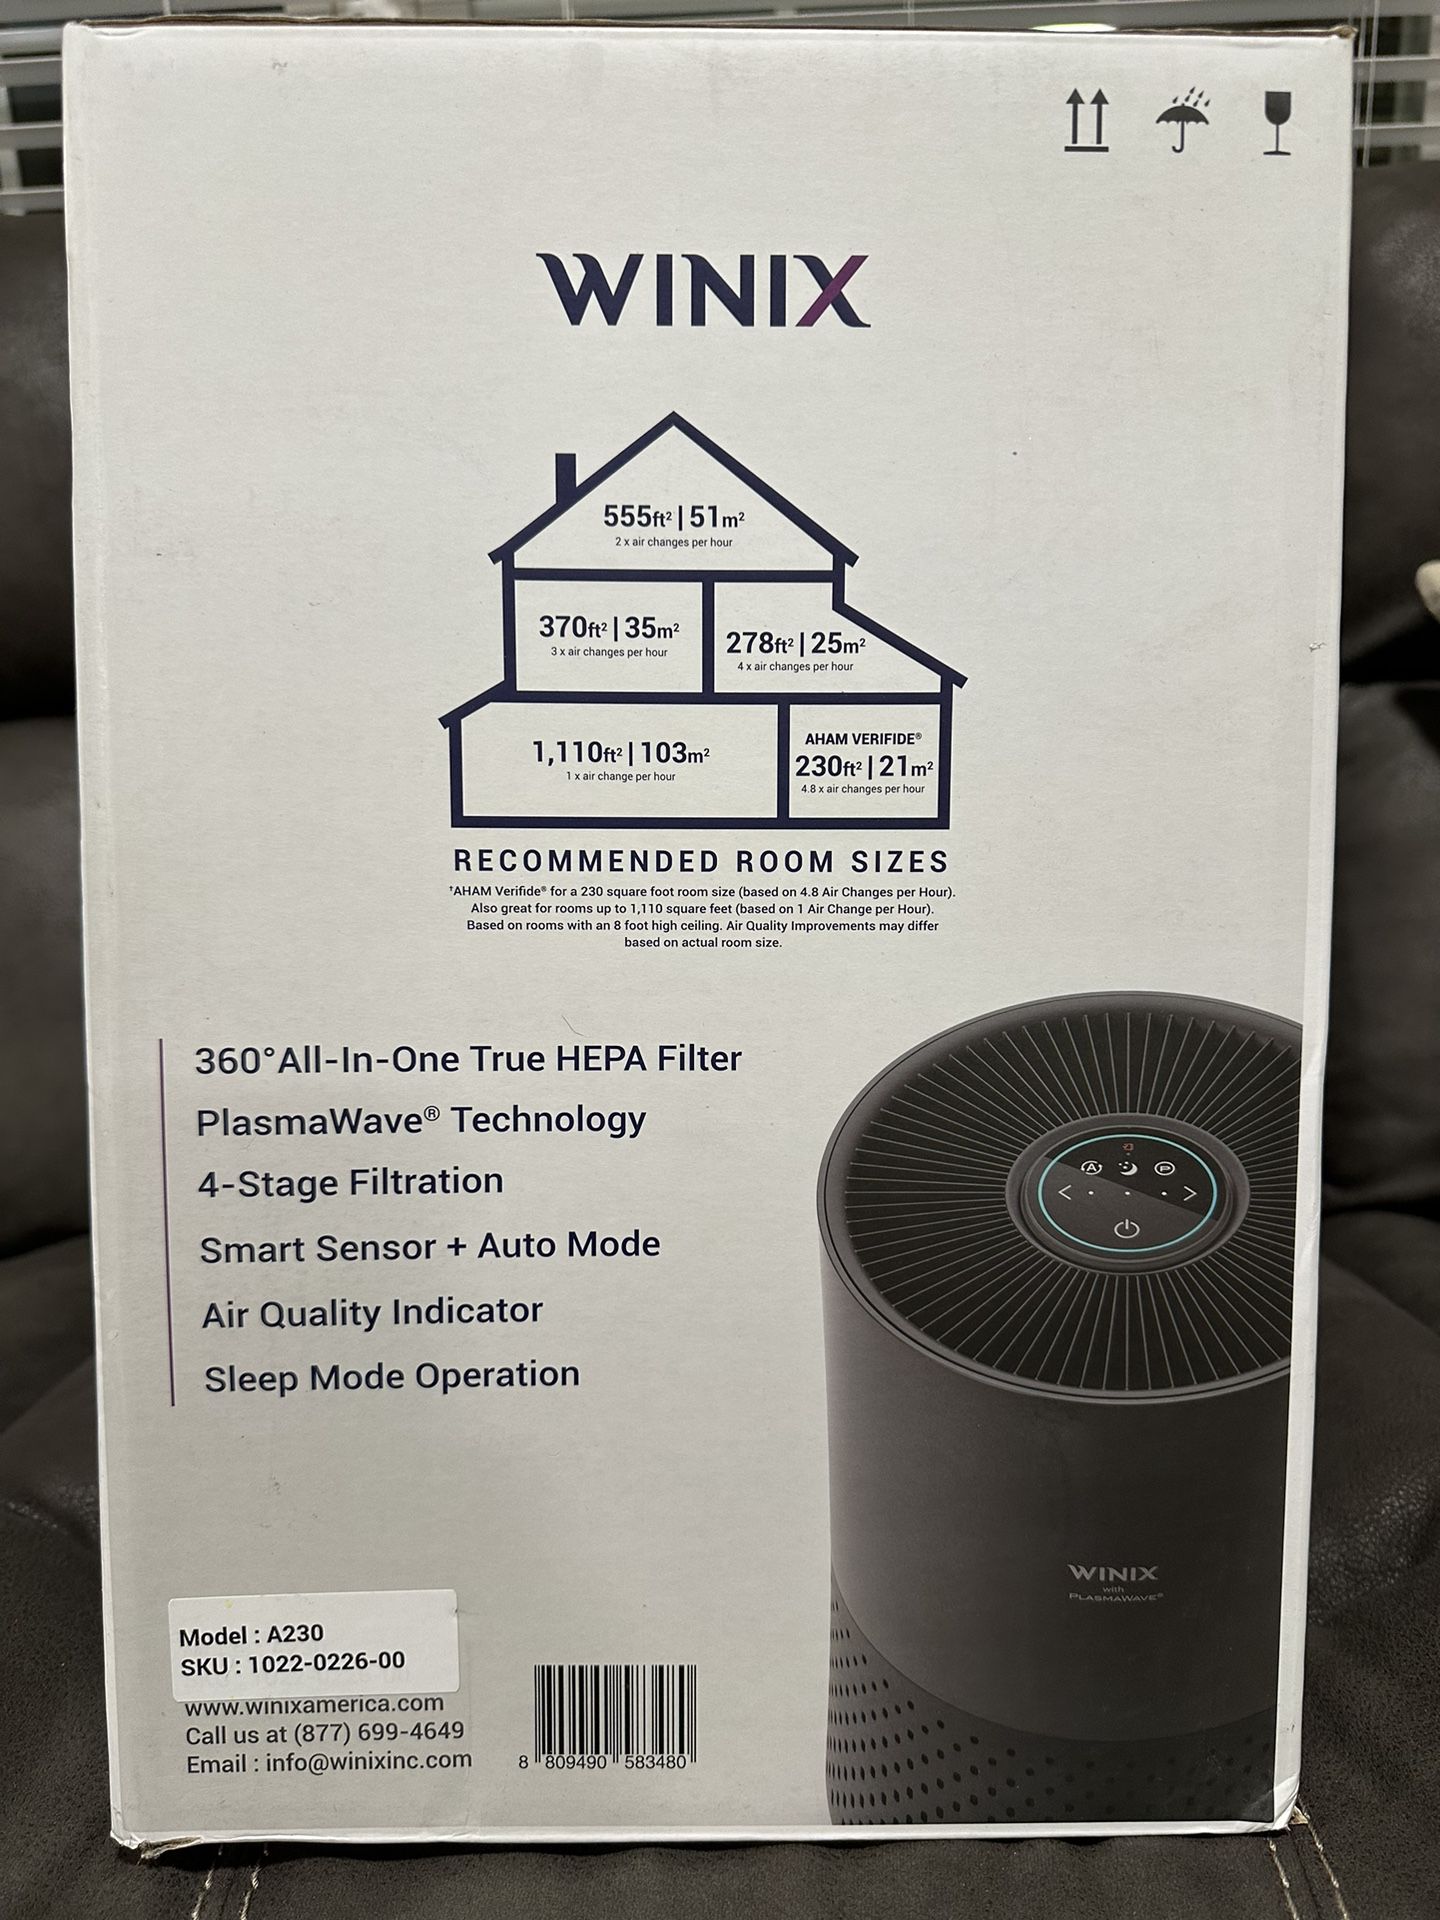 WINIX Air Purifier for Sale - New In Box